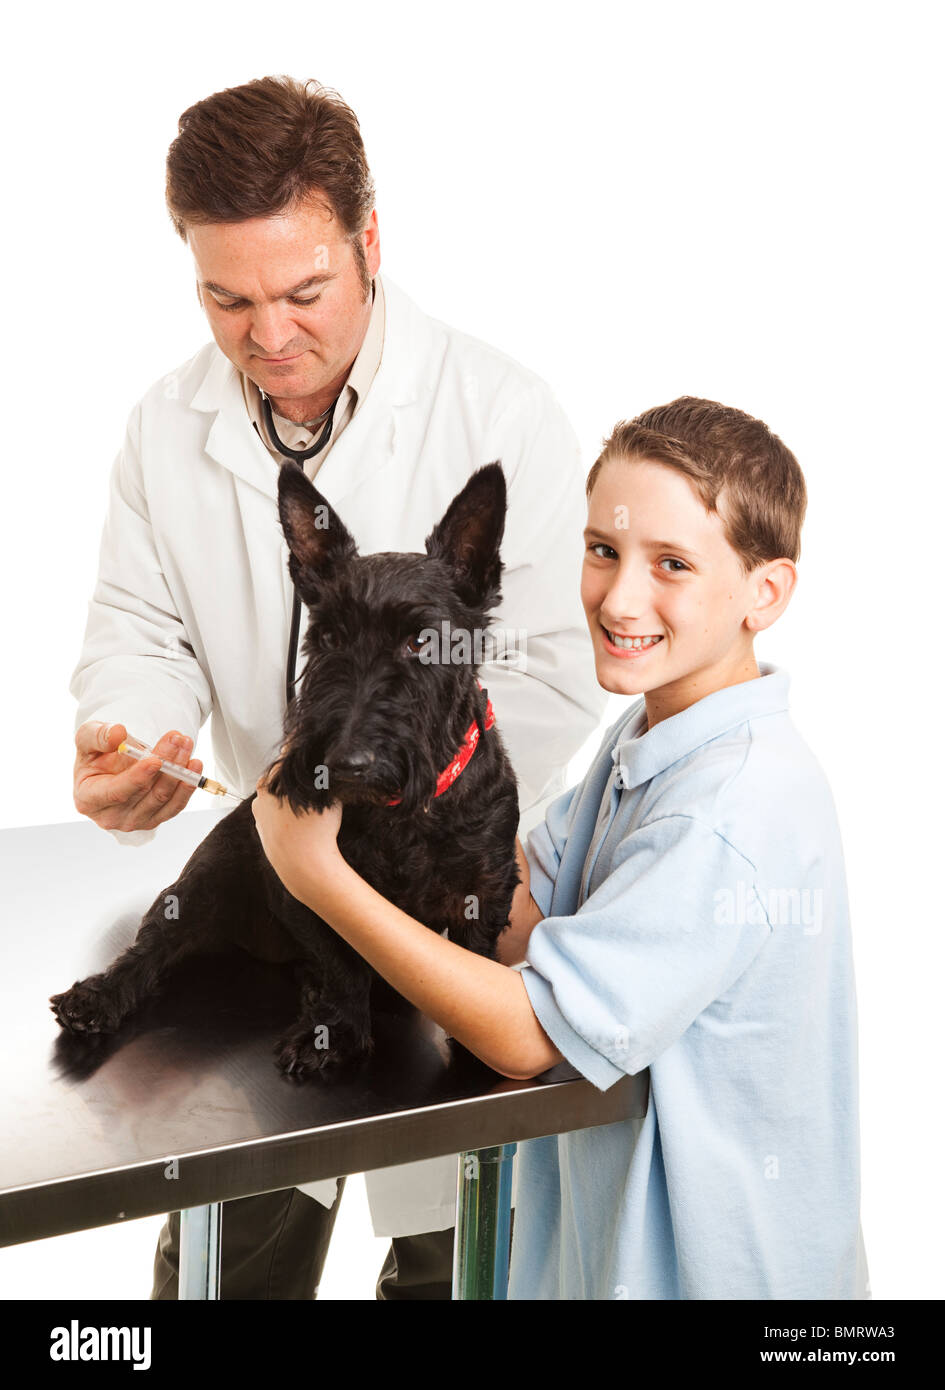 Veterinarian giving a shot to a little boy's Scotty dog. White background. Stock Photo